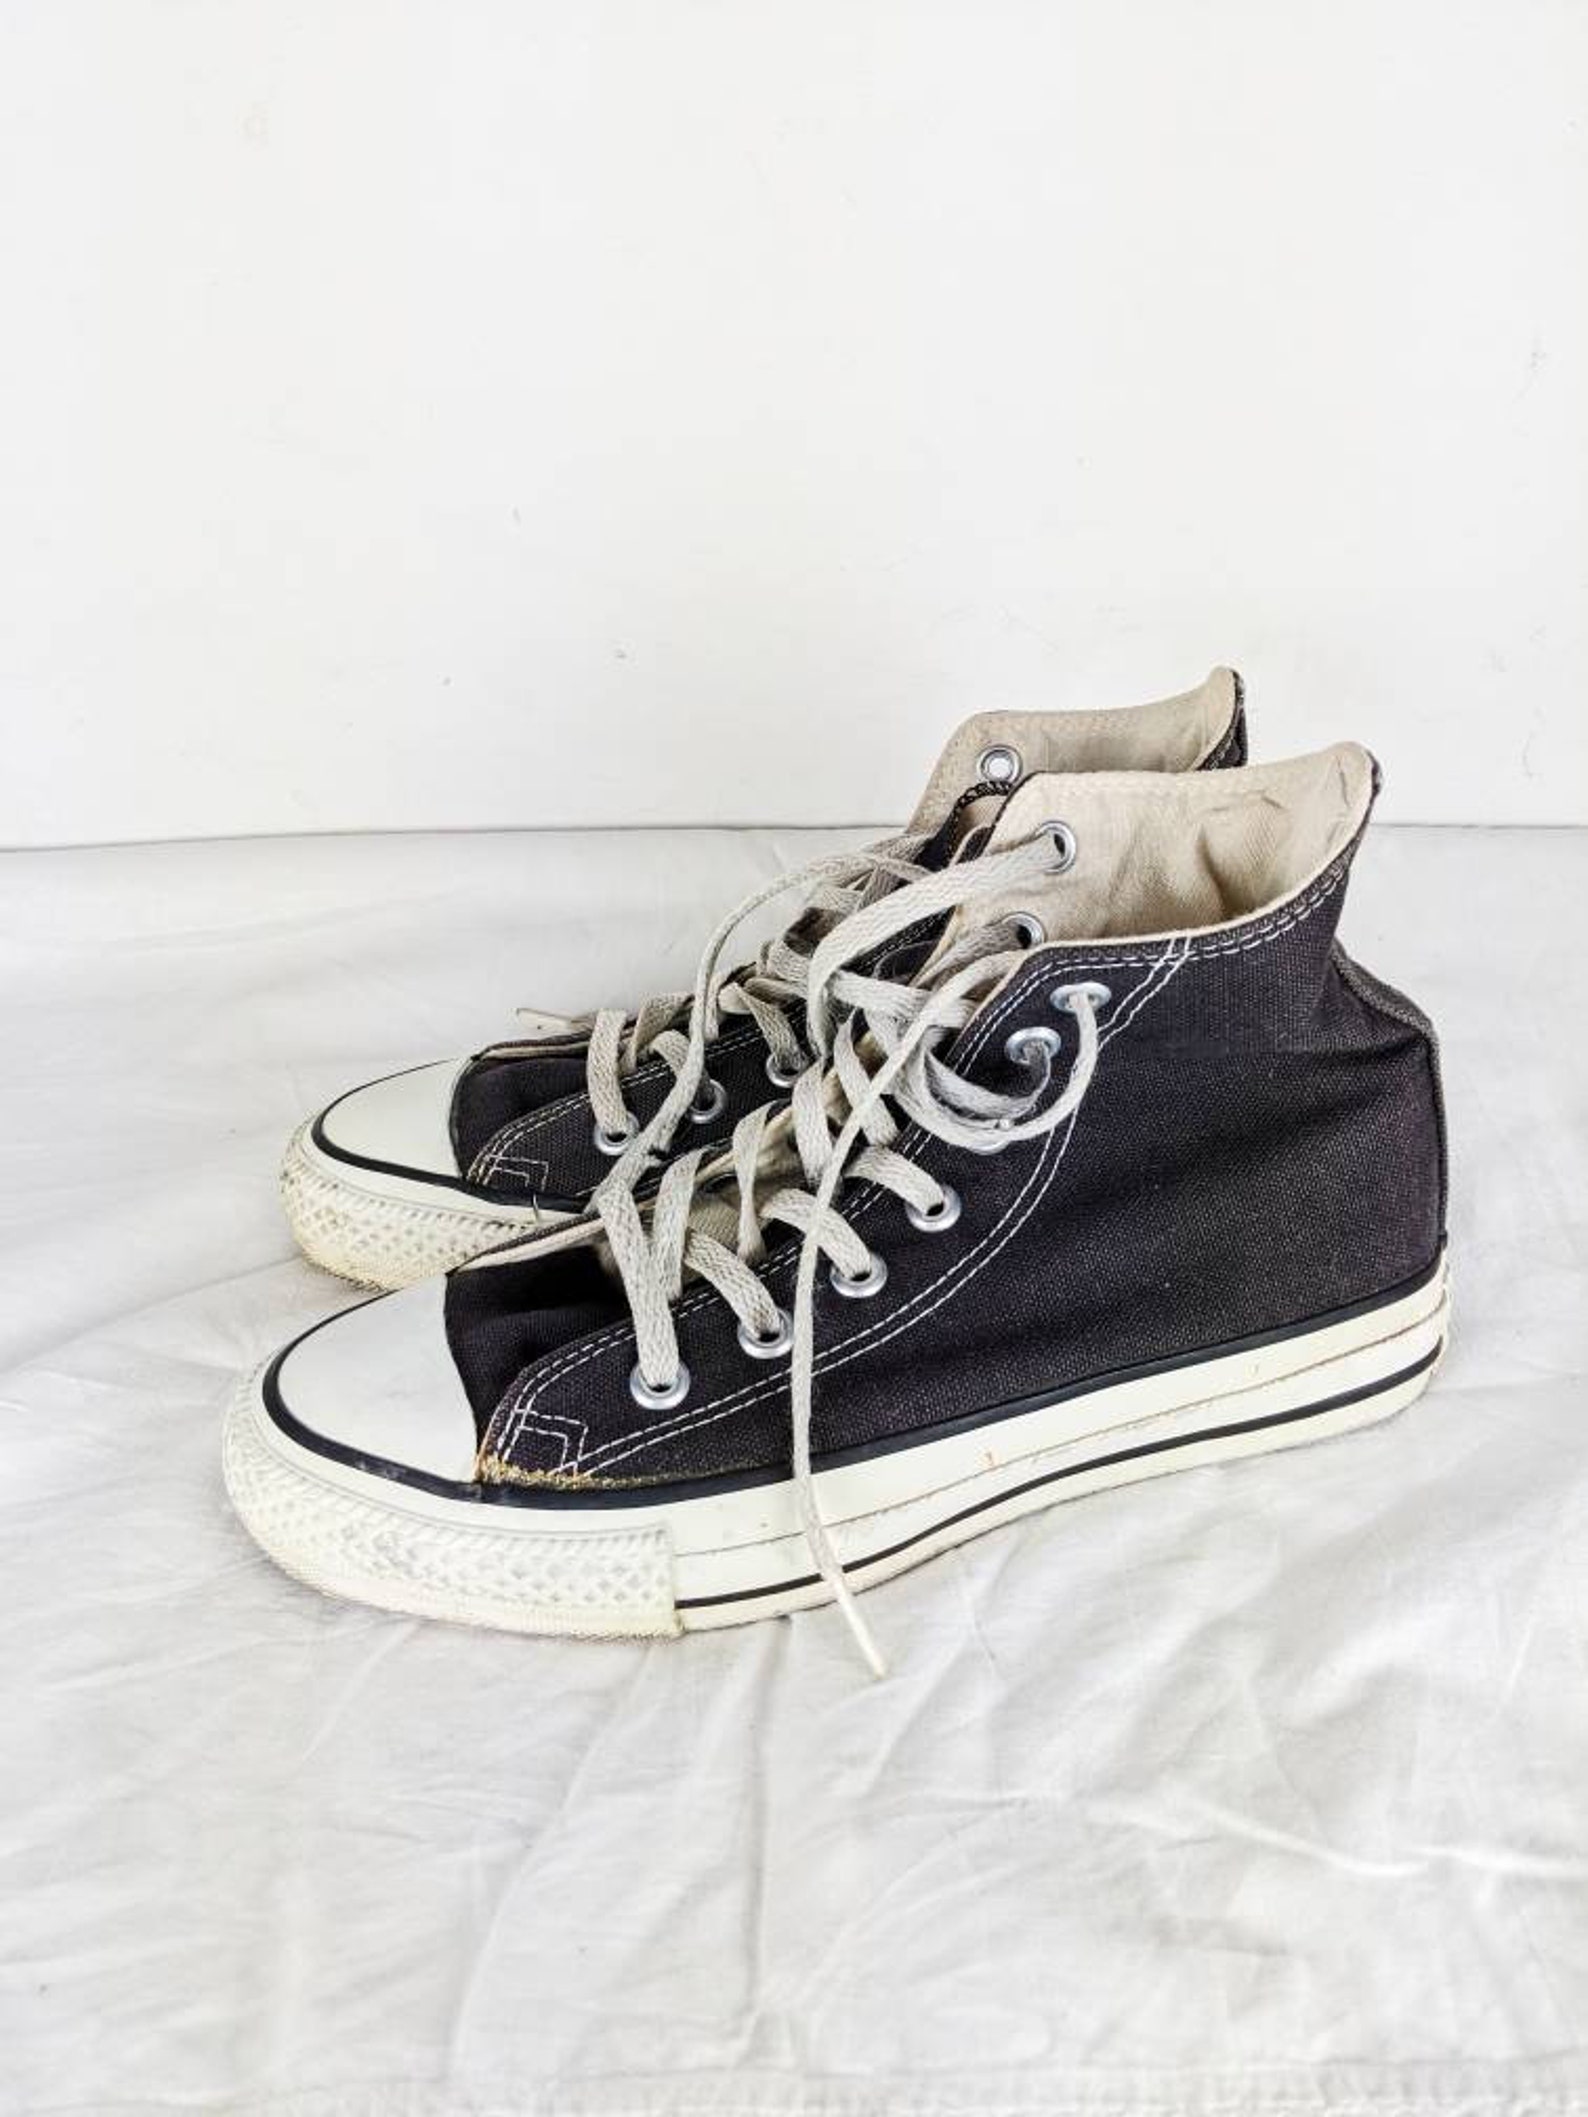 Vintage Converse All Star Chuck Taylor Made in USA - Etsy